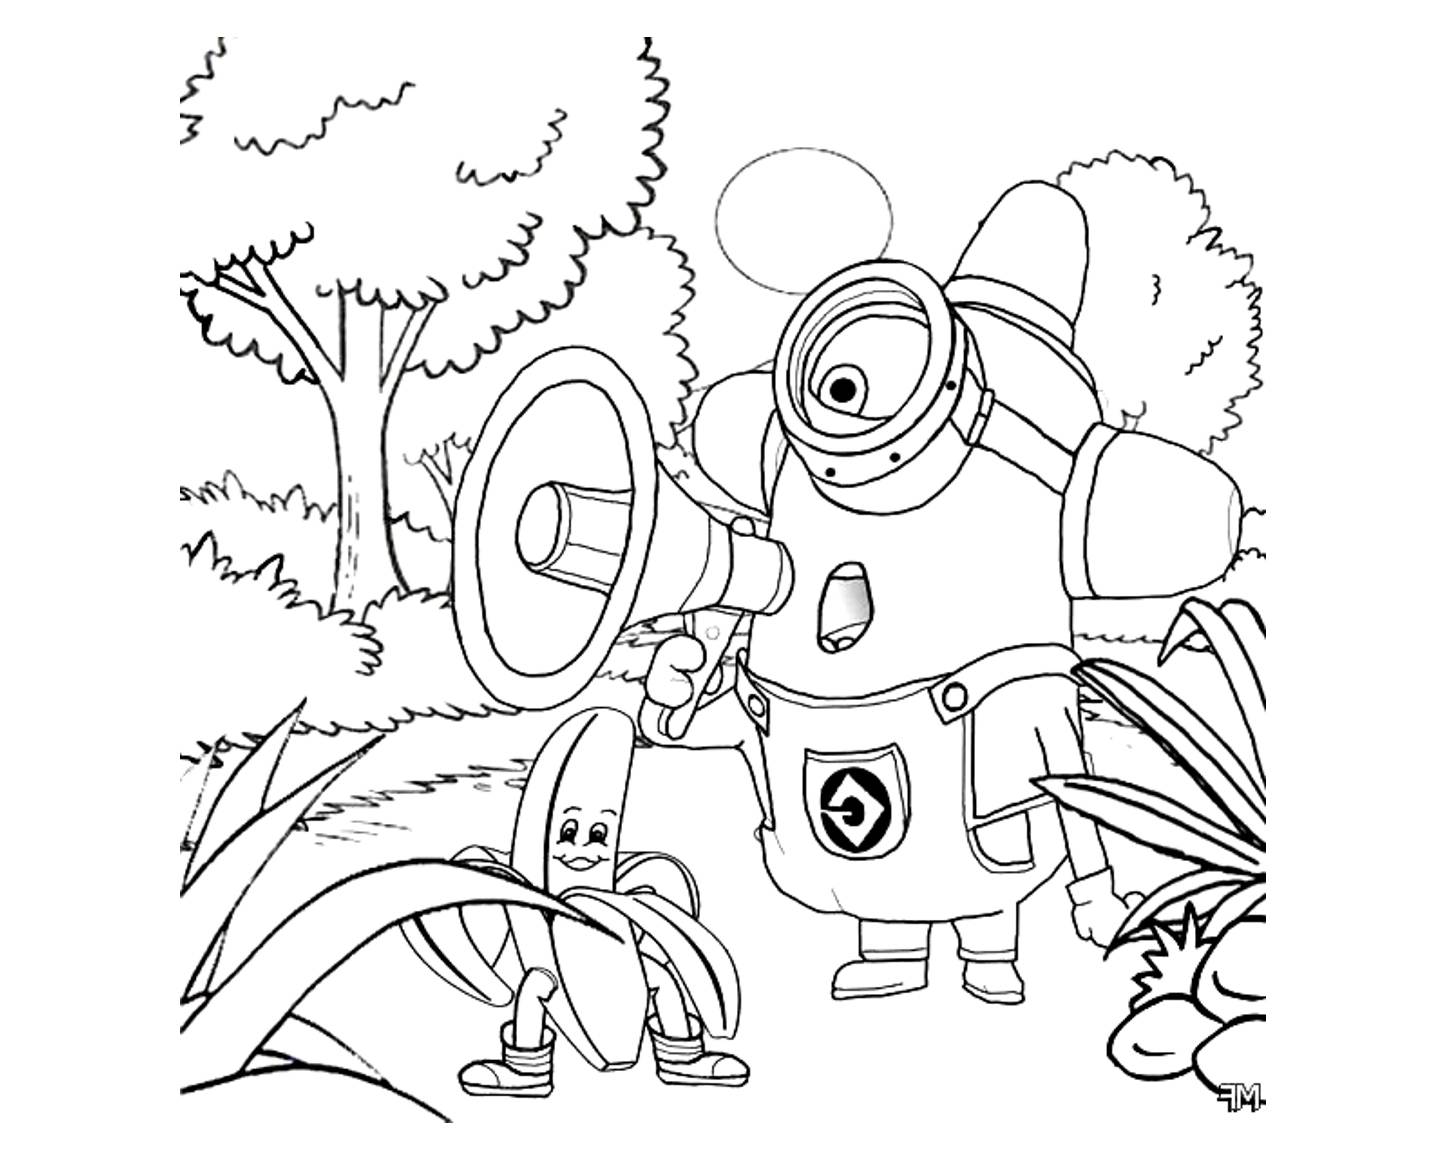 Minion Bob from rise of gru - Coloring Pages for kids